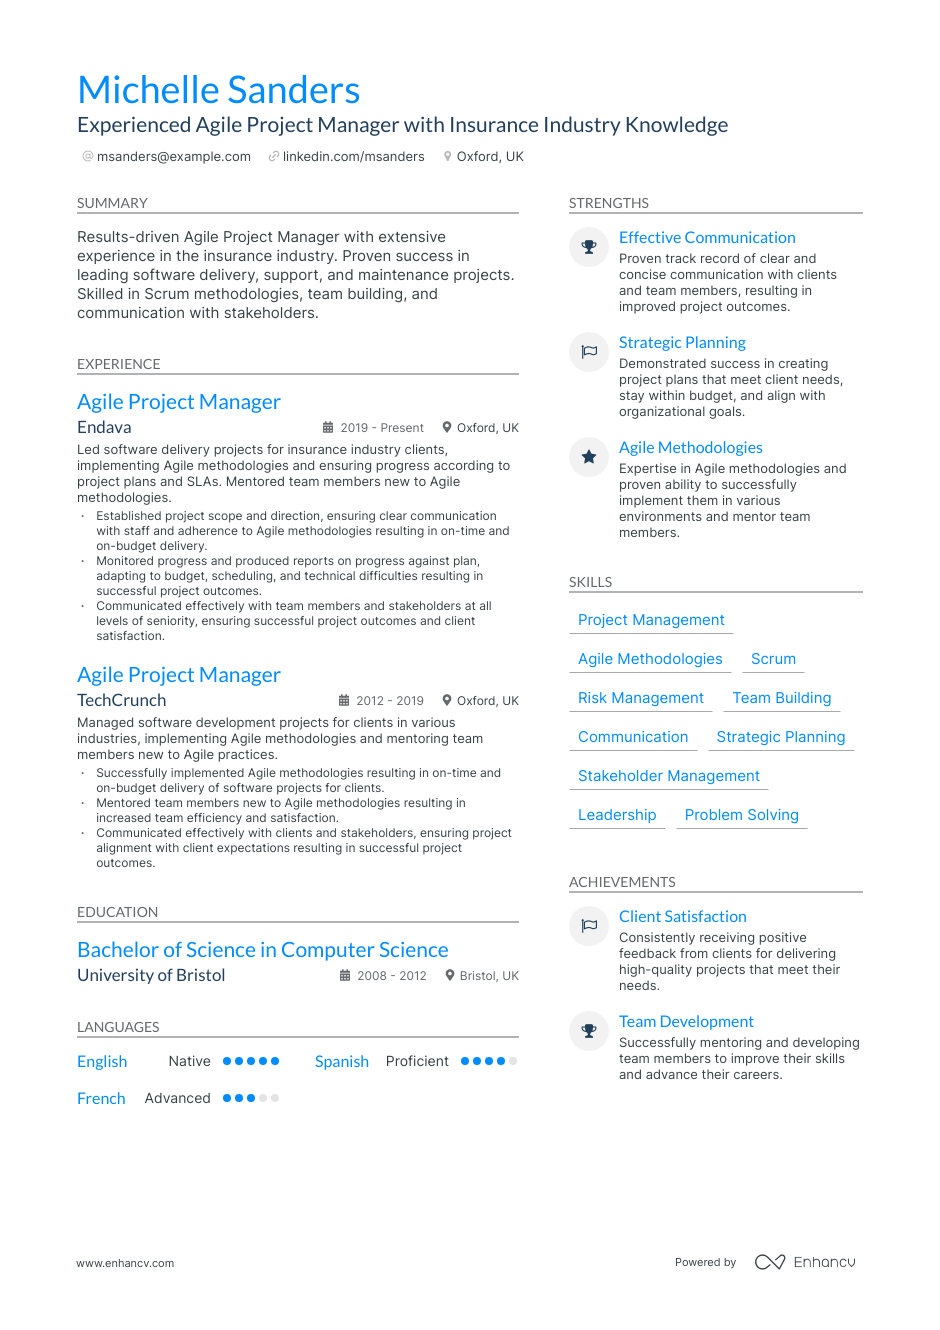 Experienced Agile Project Manager with Insurance Industry Knowledge CV example